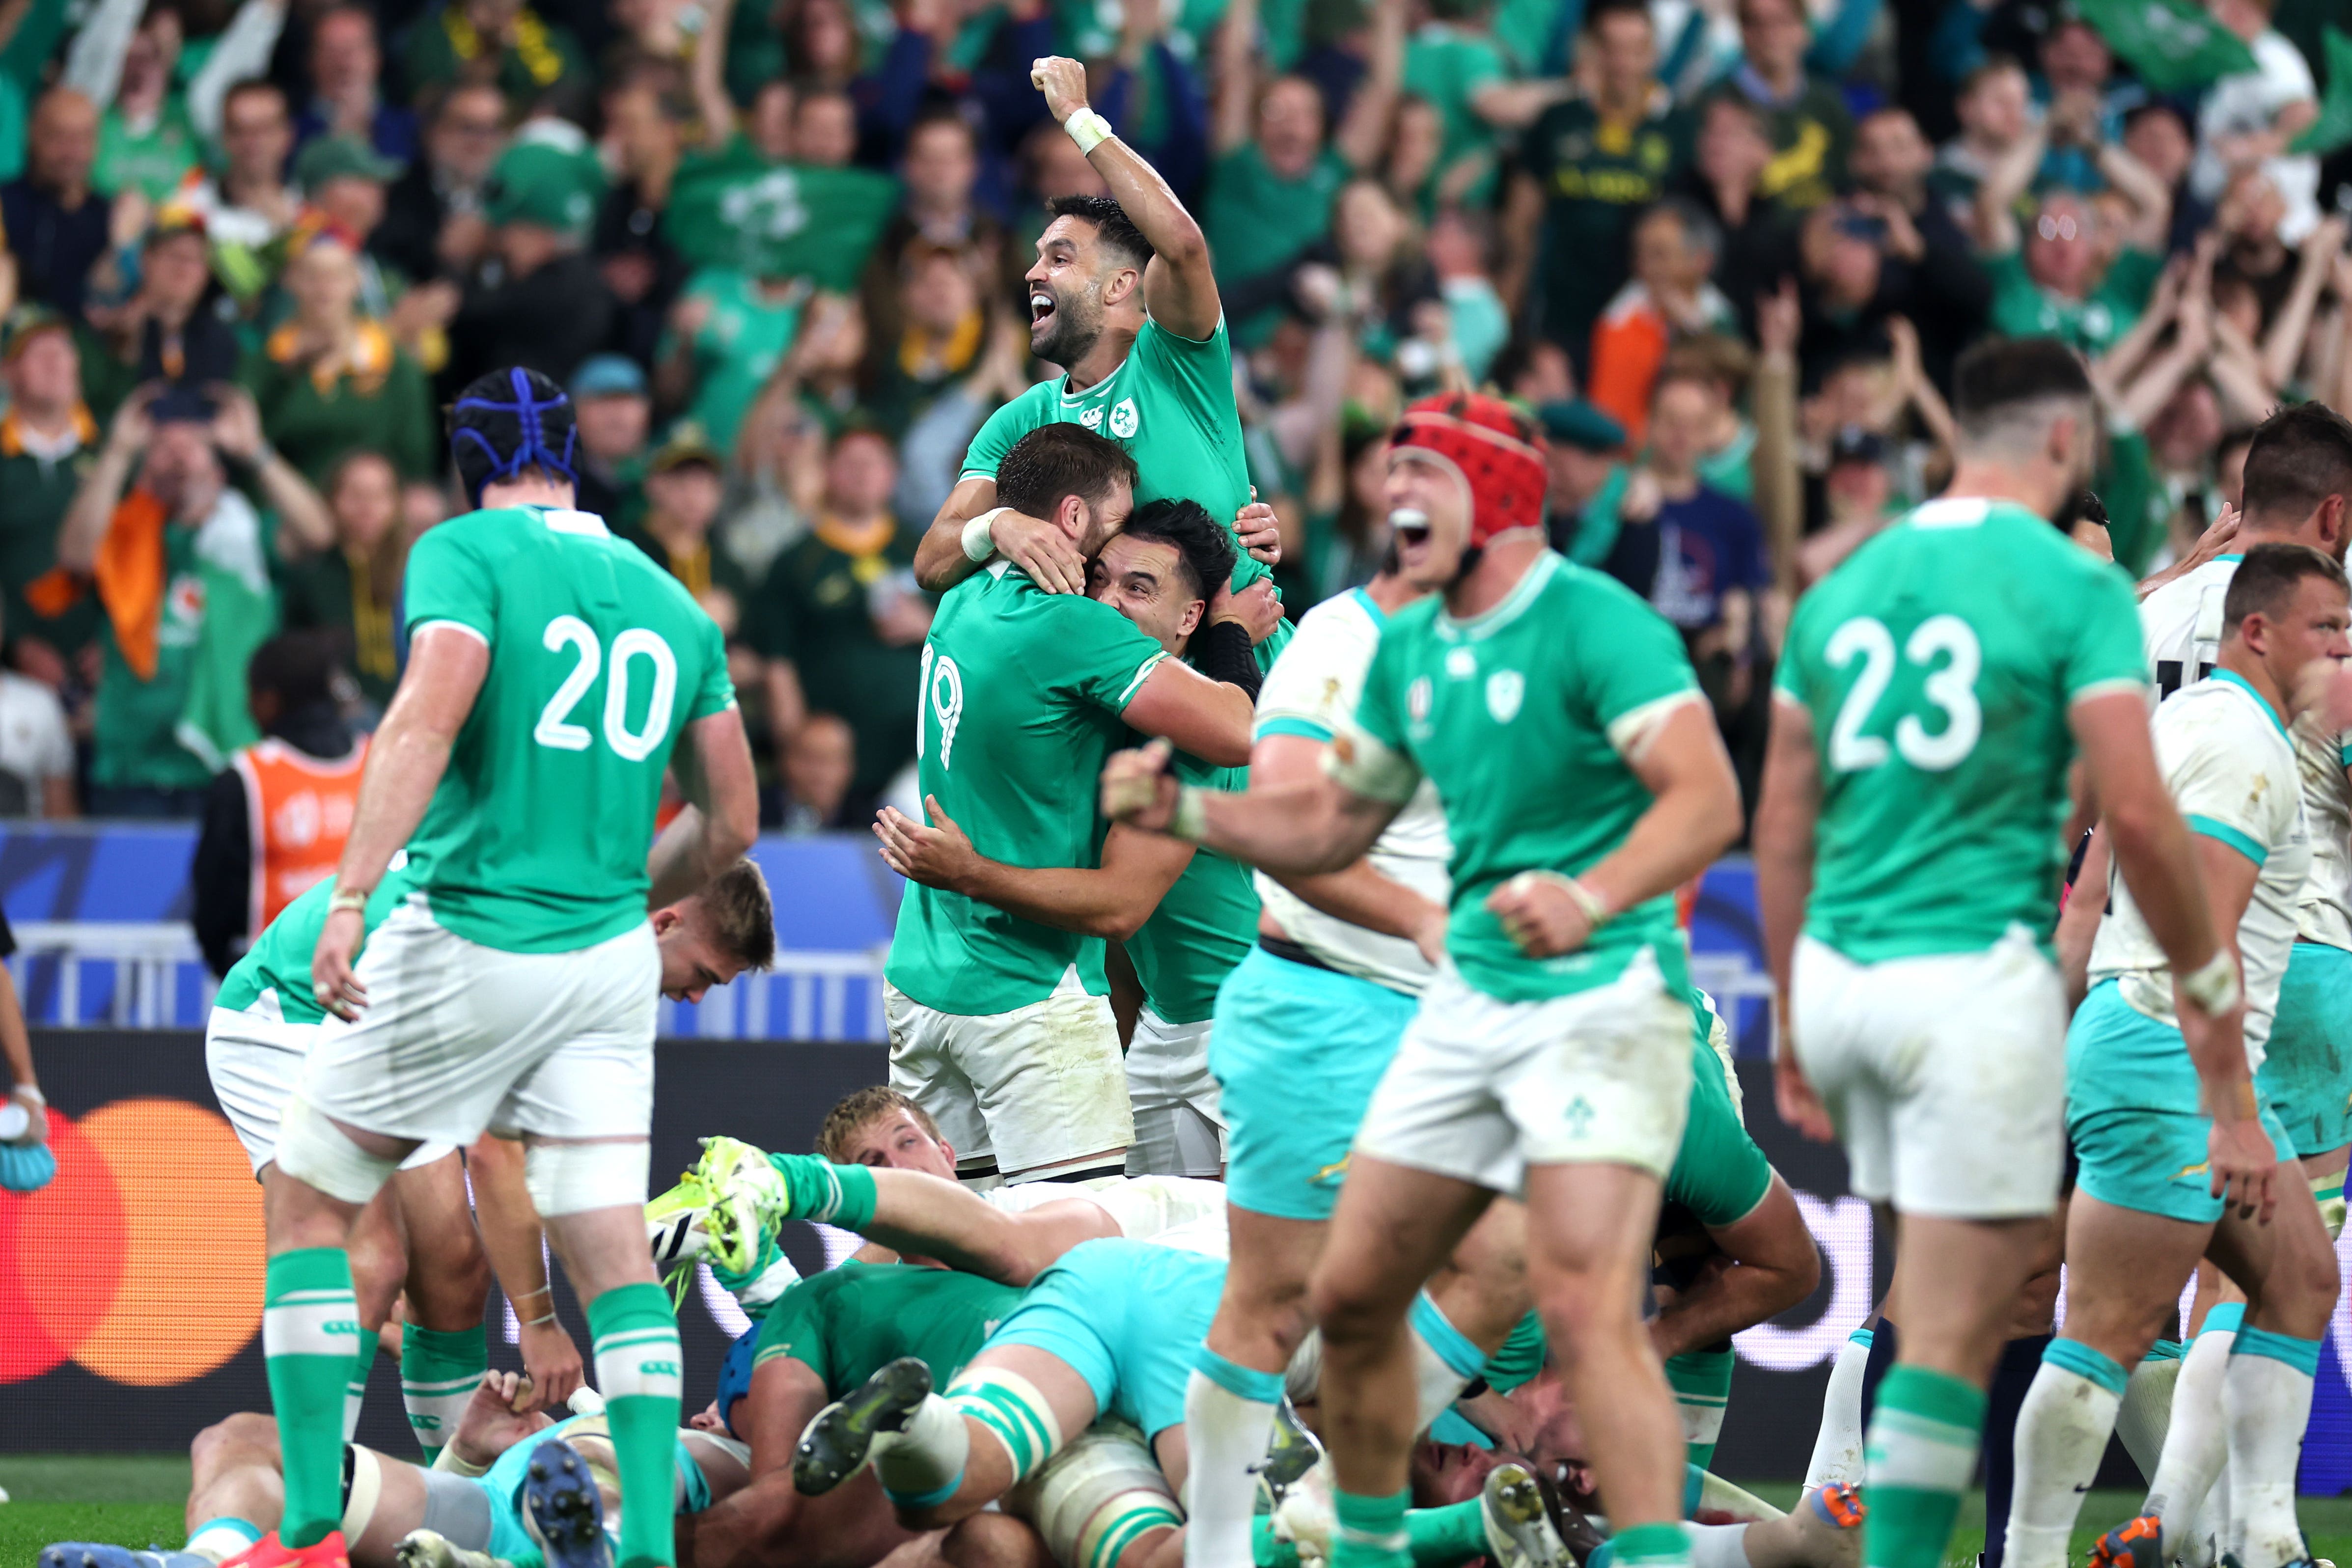 Ireland’s win over South Africa has left them two points away from securing a quarter-final spot